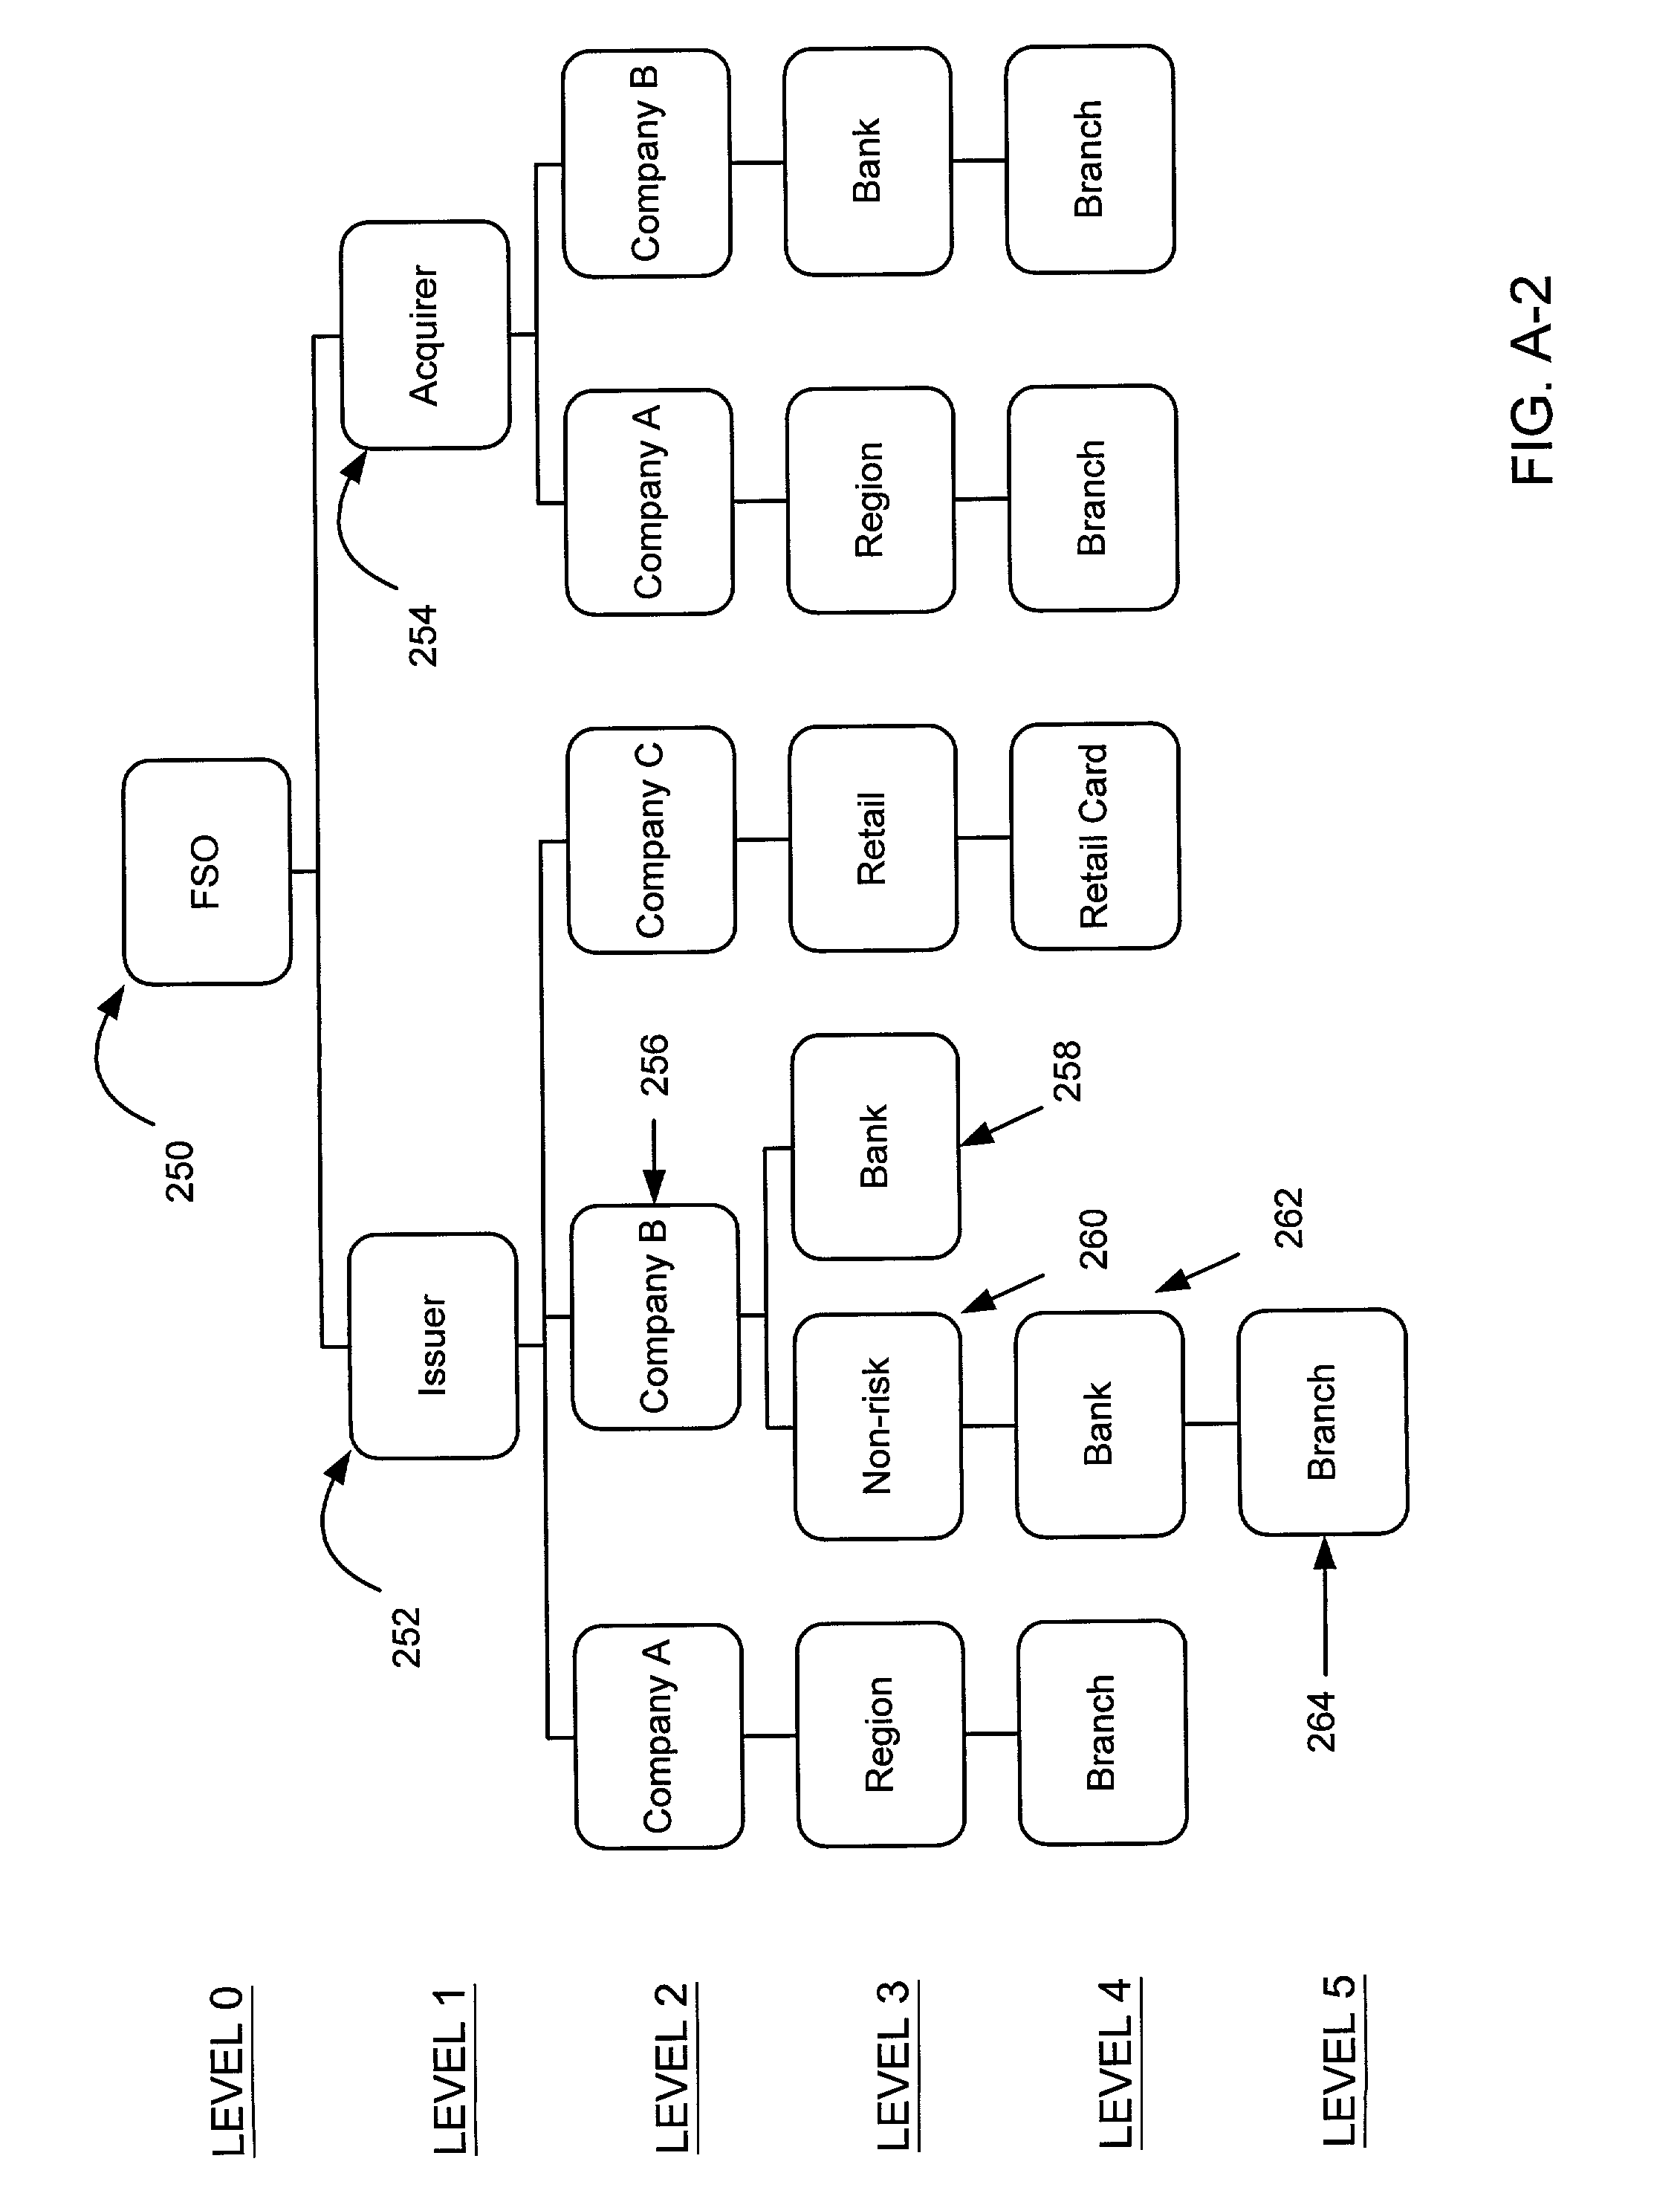 Business transaction processing systems and methods